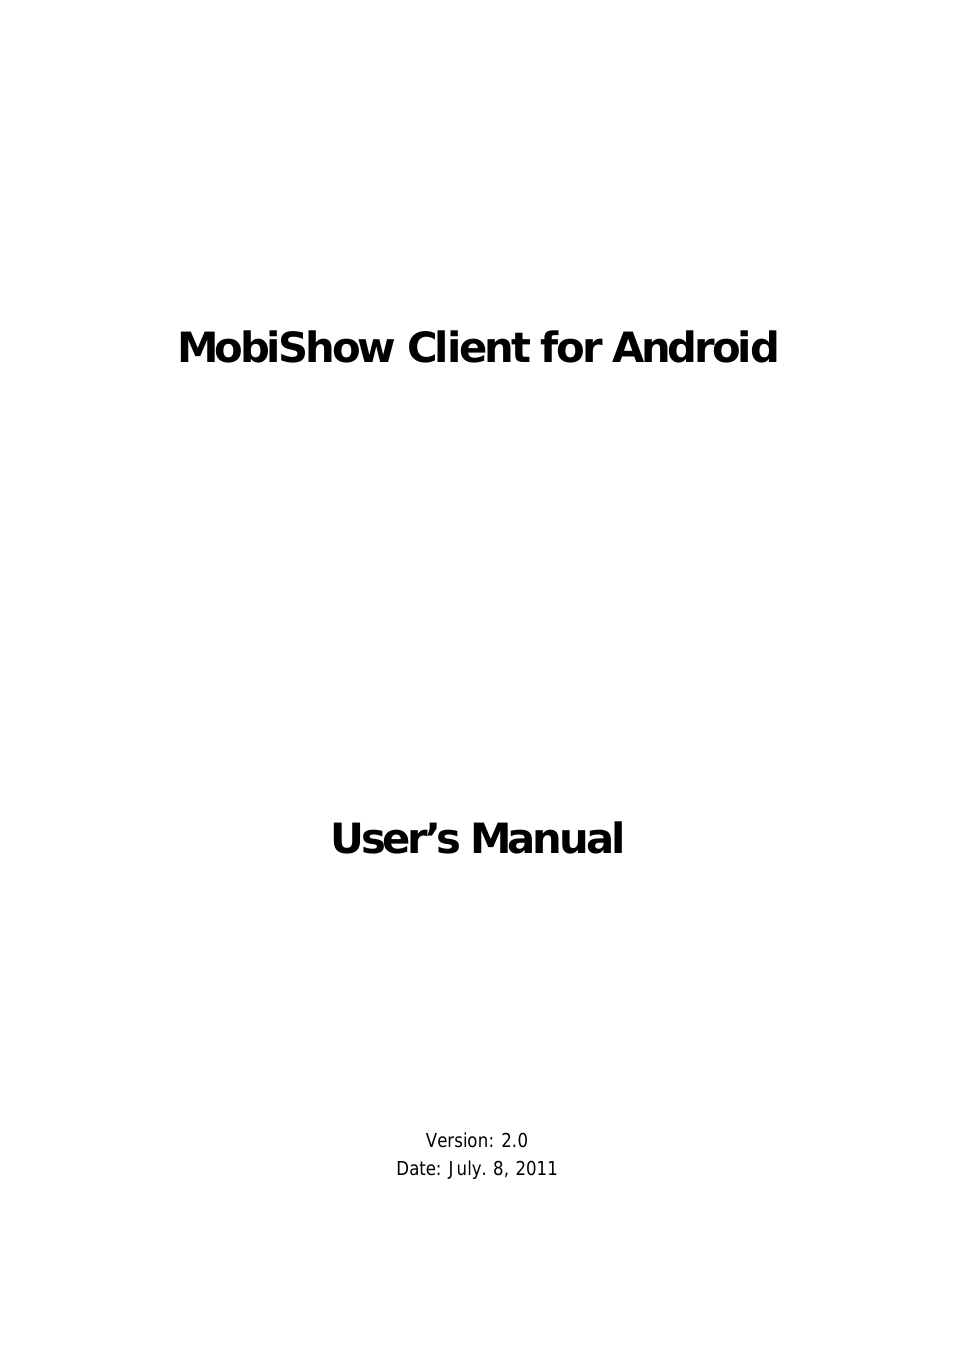 MobiShow User's Manual for Android